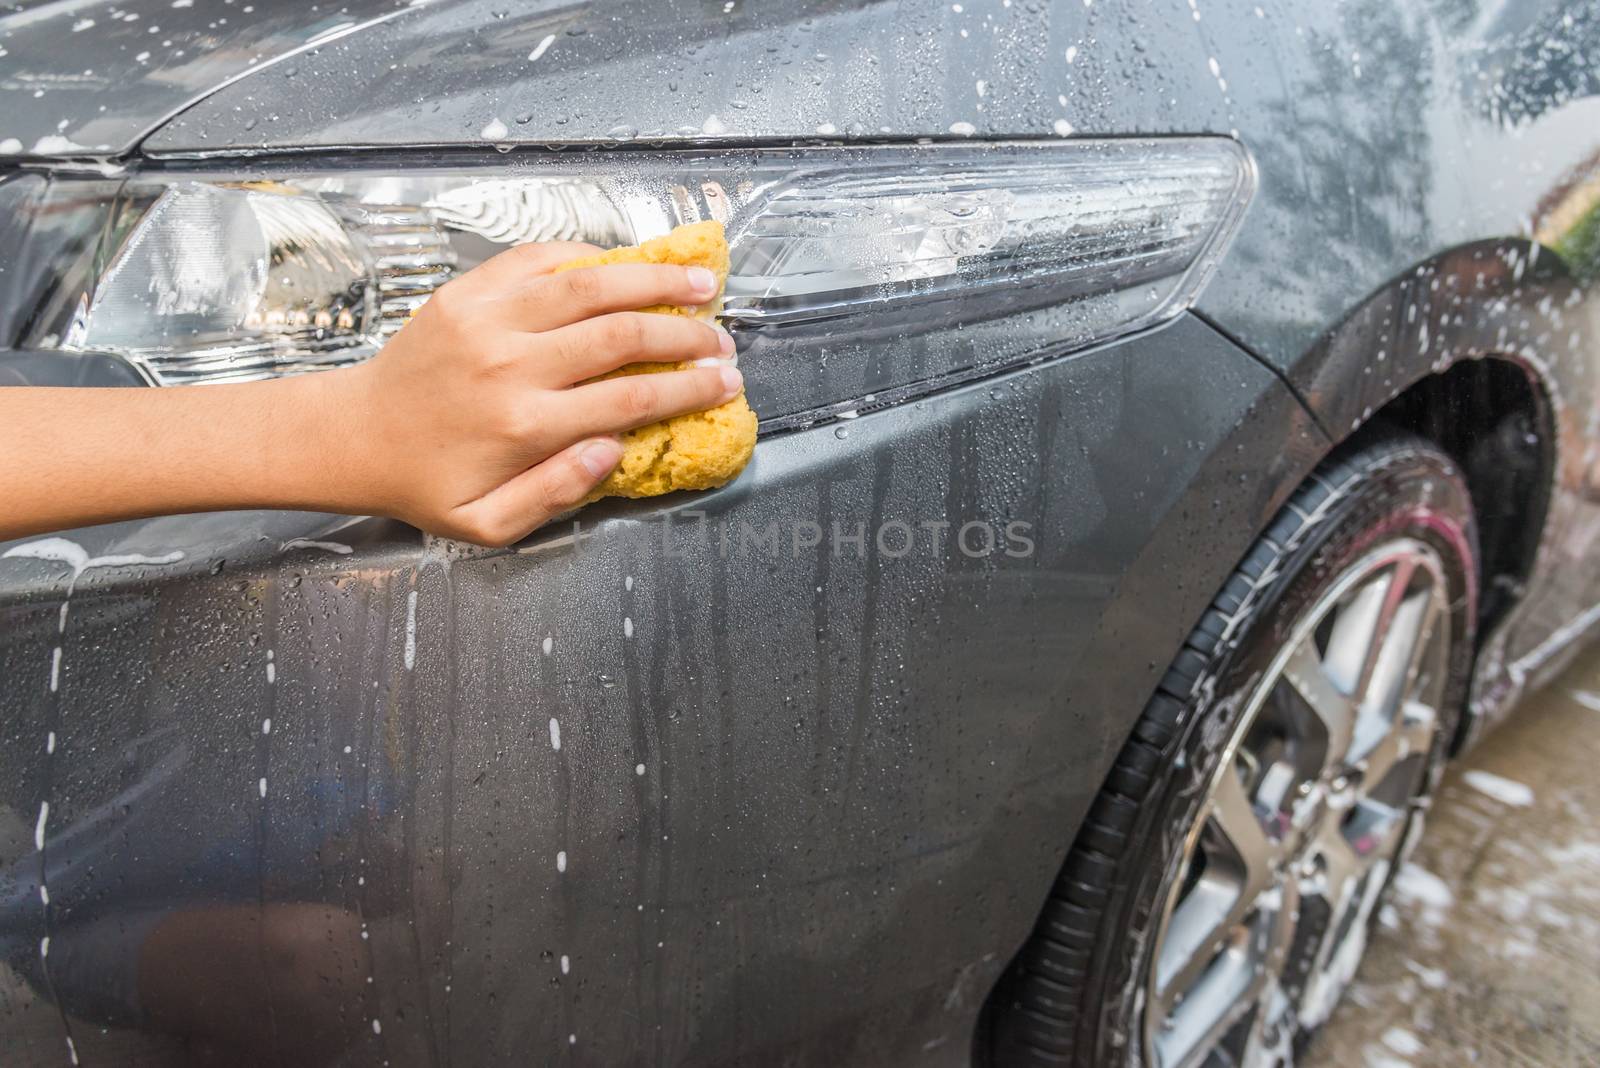 outdoor car wash with yellow sponge